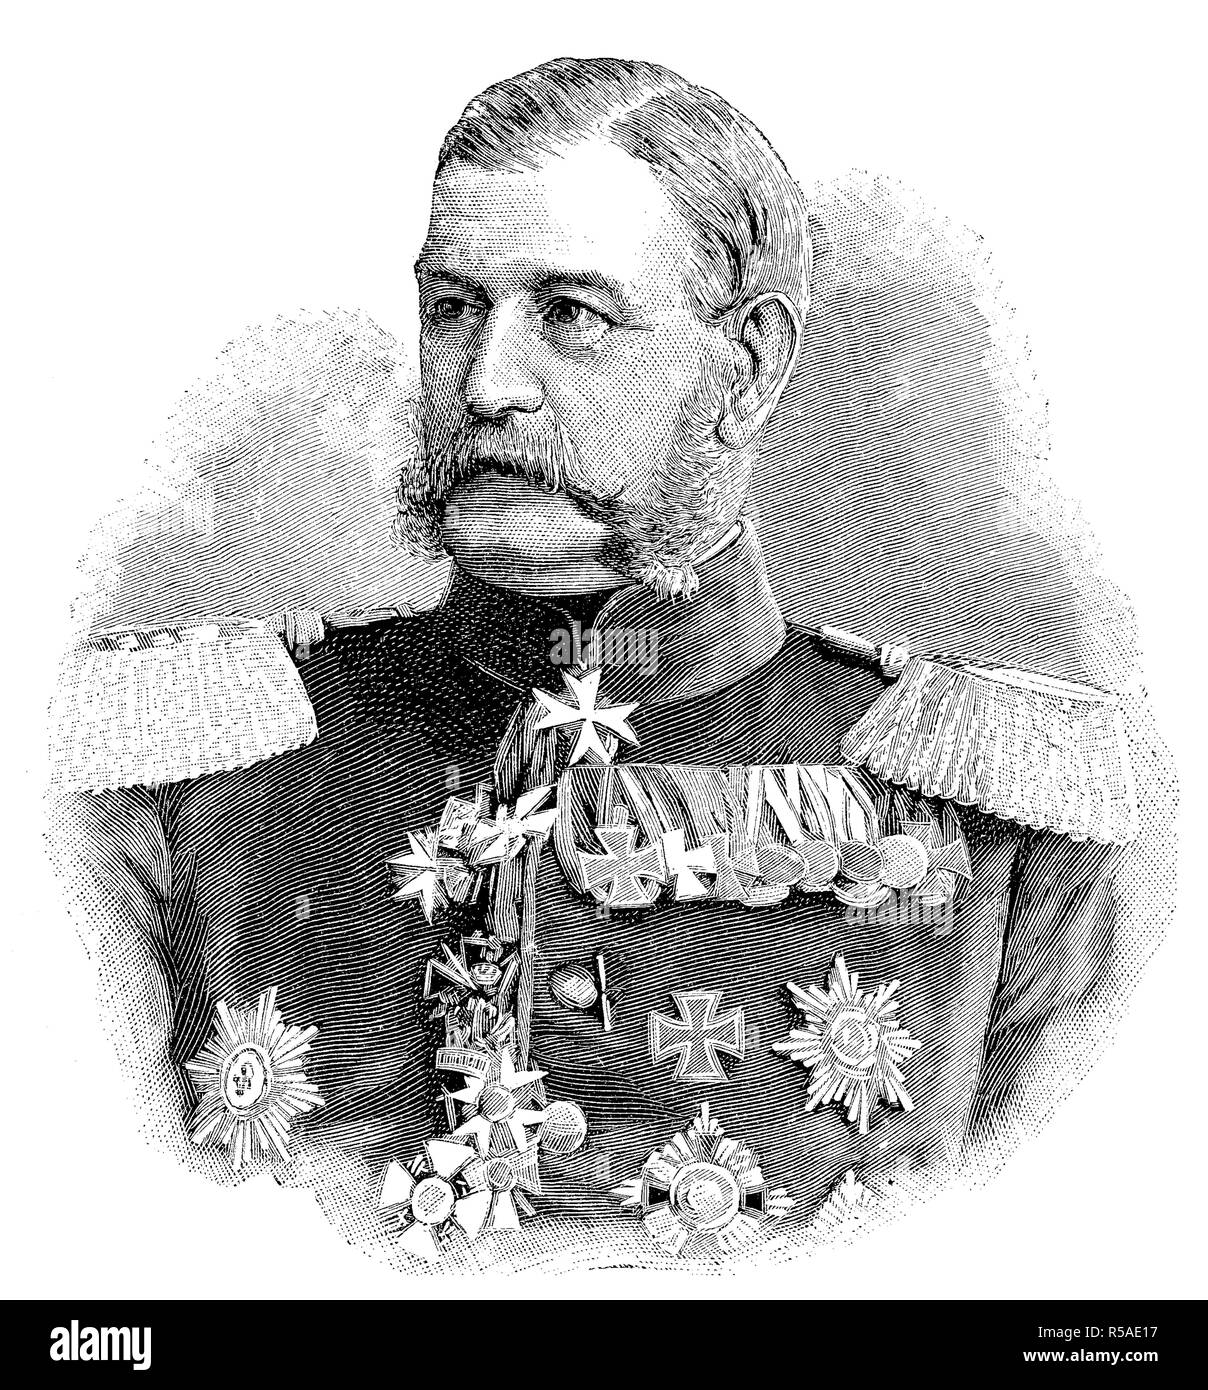 Max Ferdinand Karl von Boehn, 16 August 1850, 18 February 1921, was a Prussian officer involved in the Franco-Prussian War and Stock Photo